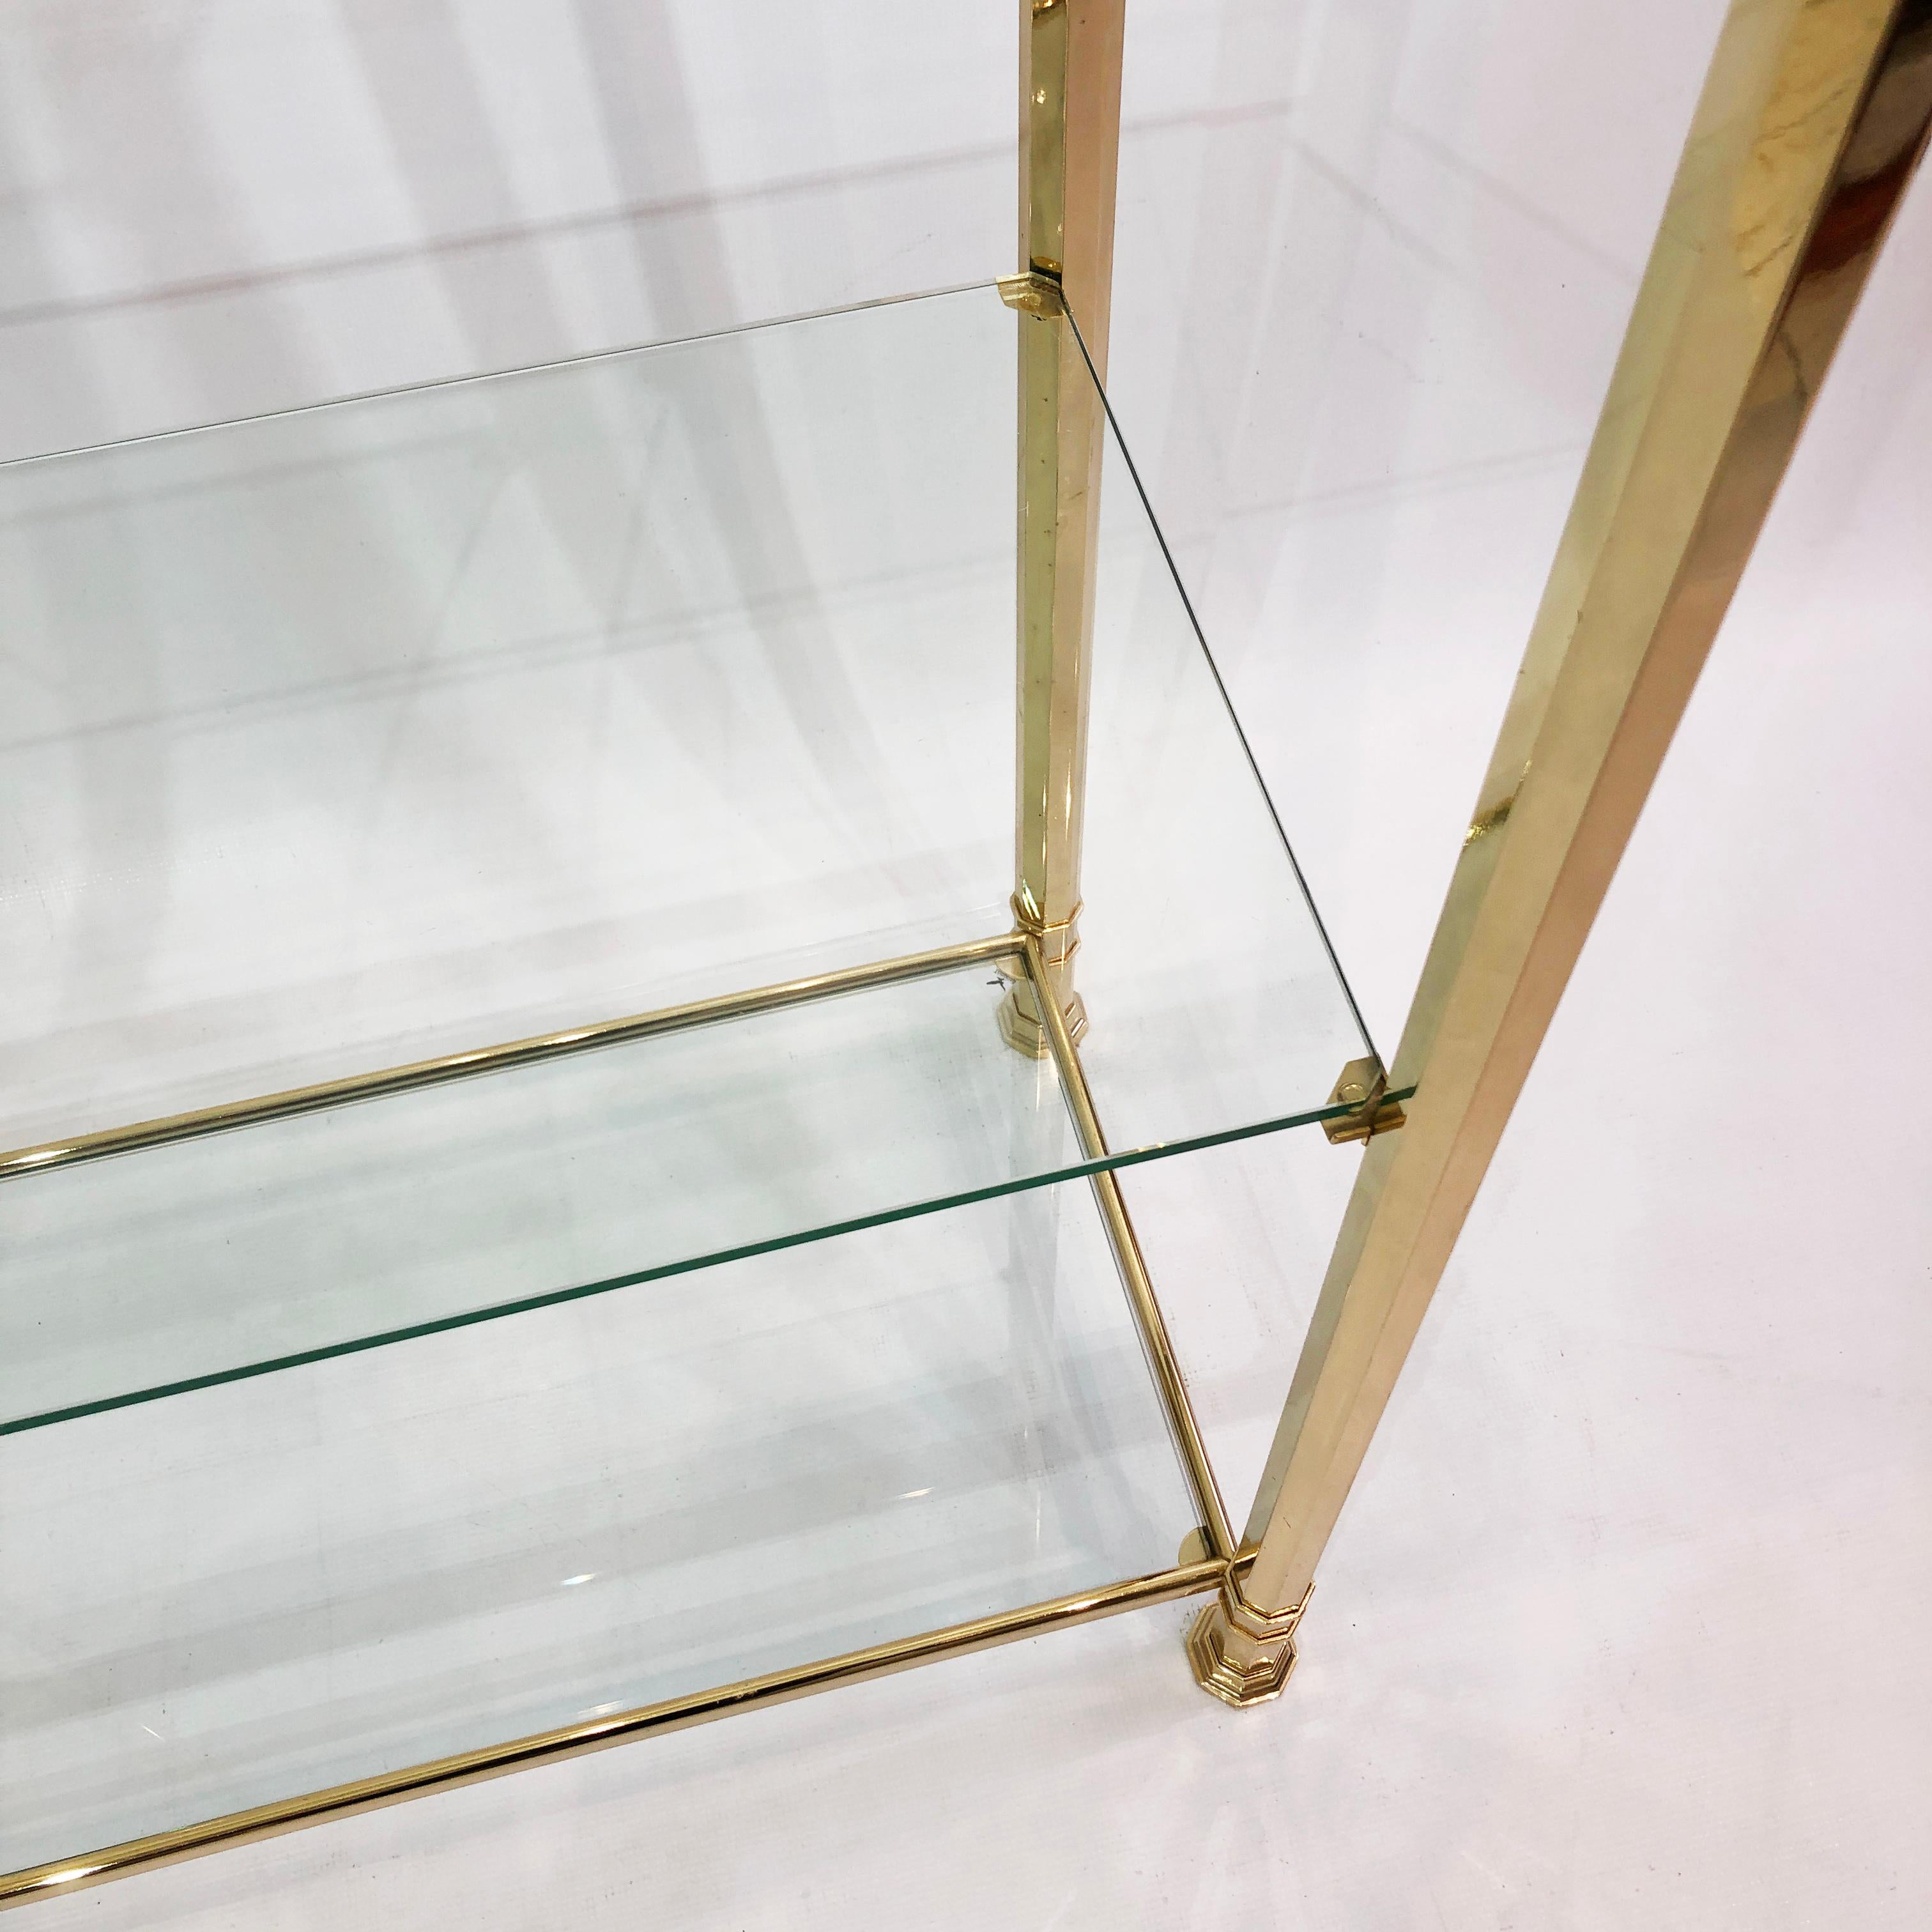 Late 20th Century Kesterport Gold Glass Polygonal Etagere Brass Shelving 1980s Display Unit For Sale